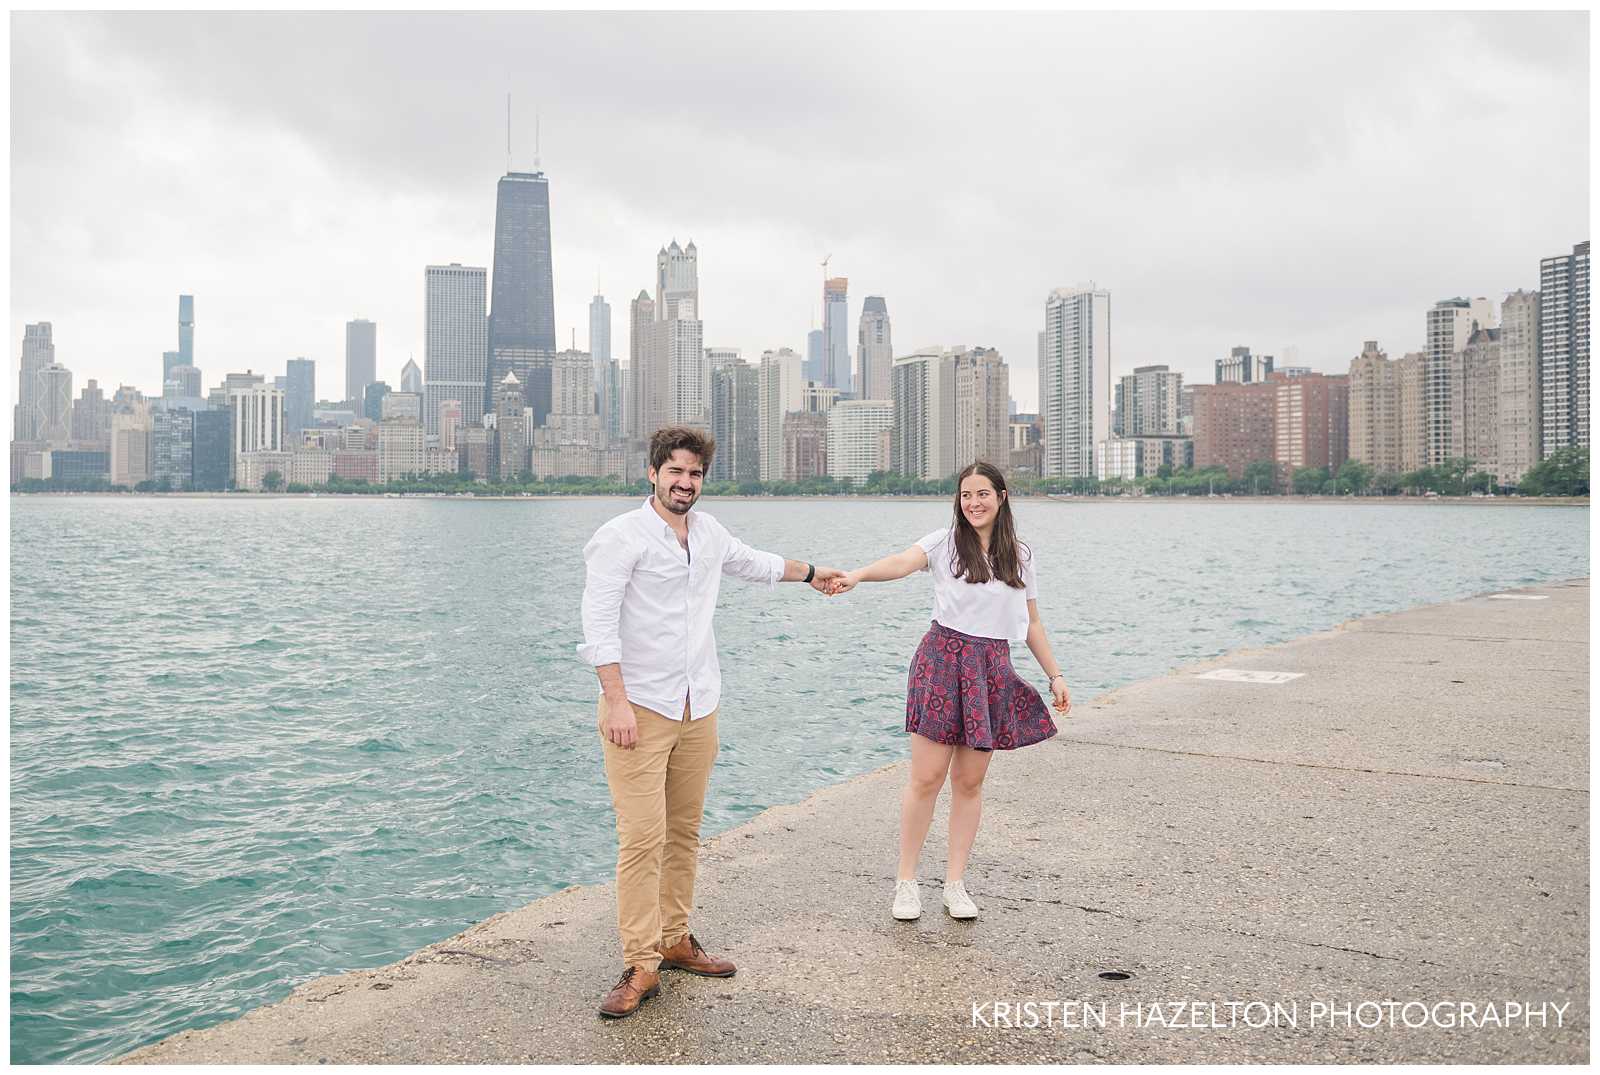 Woman looking at her new fiance in front of the Chicago skyline